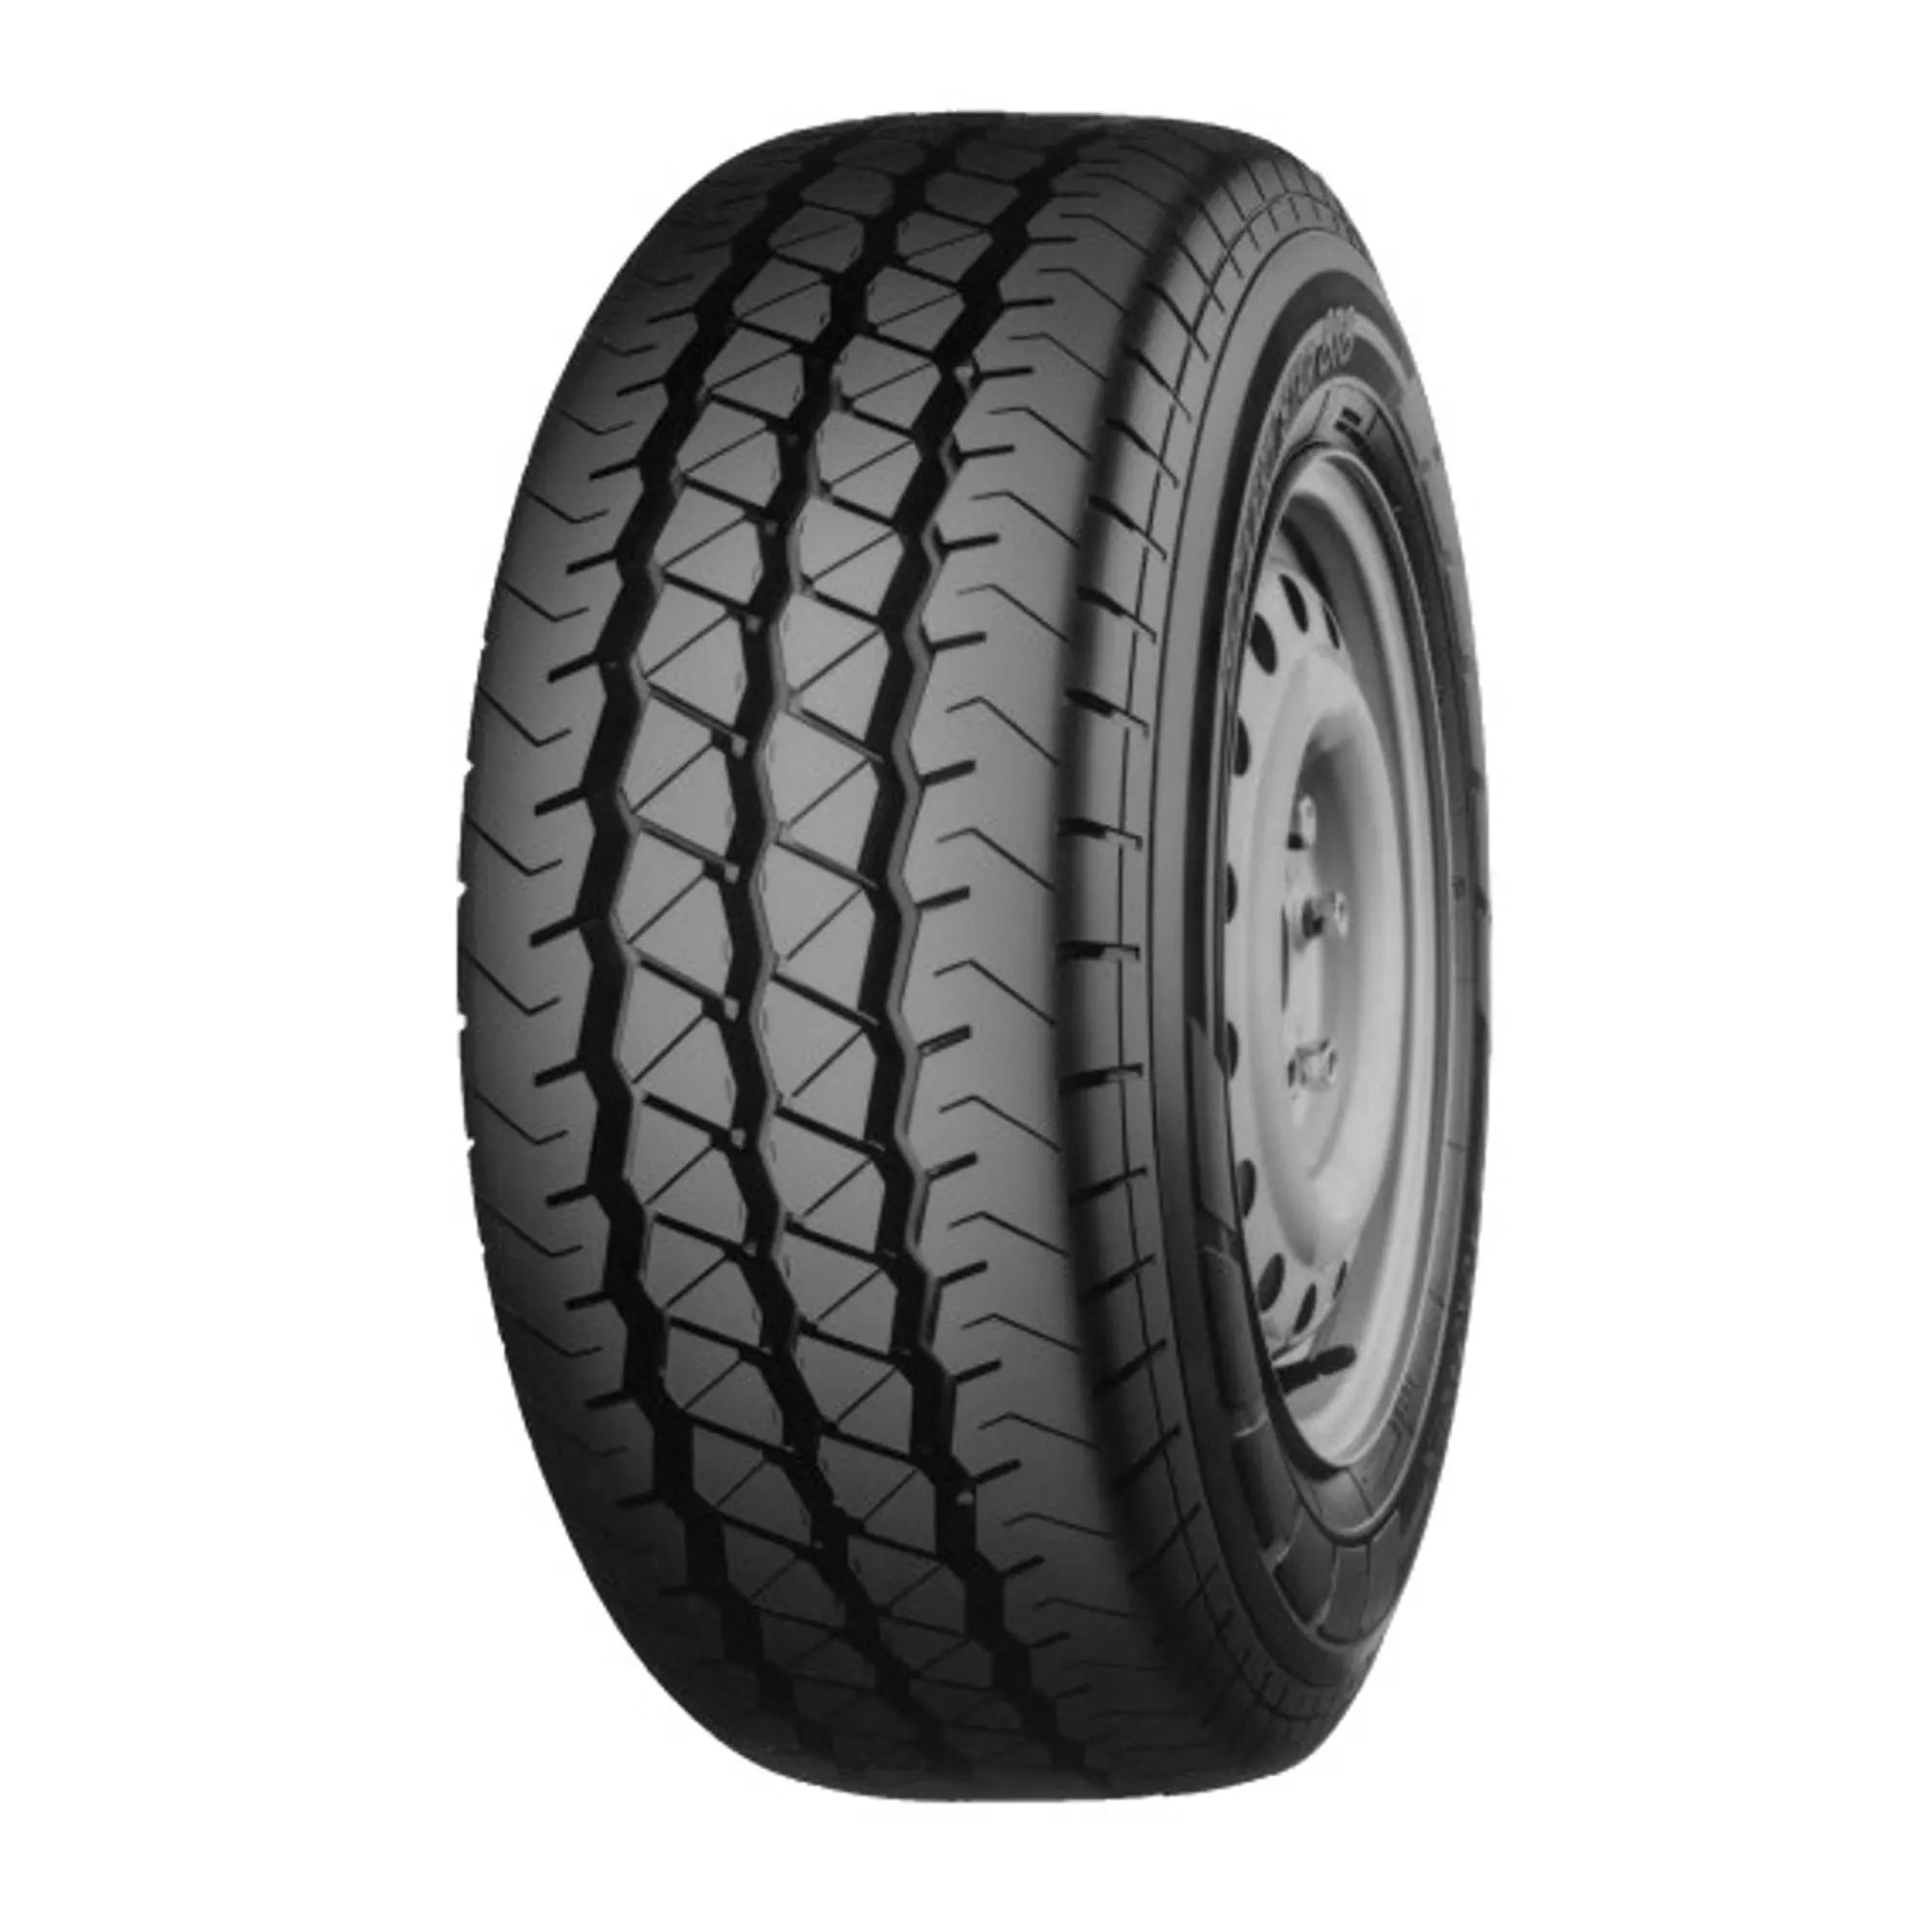 Шина 195/70R15C 104/102R Delivery Star RY818